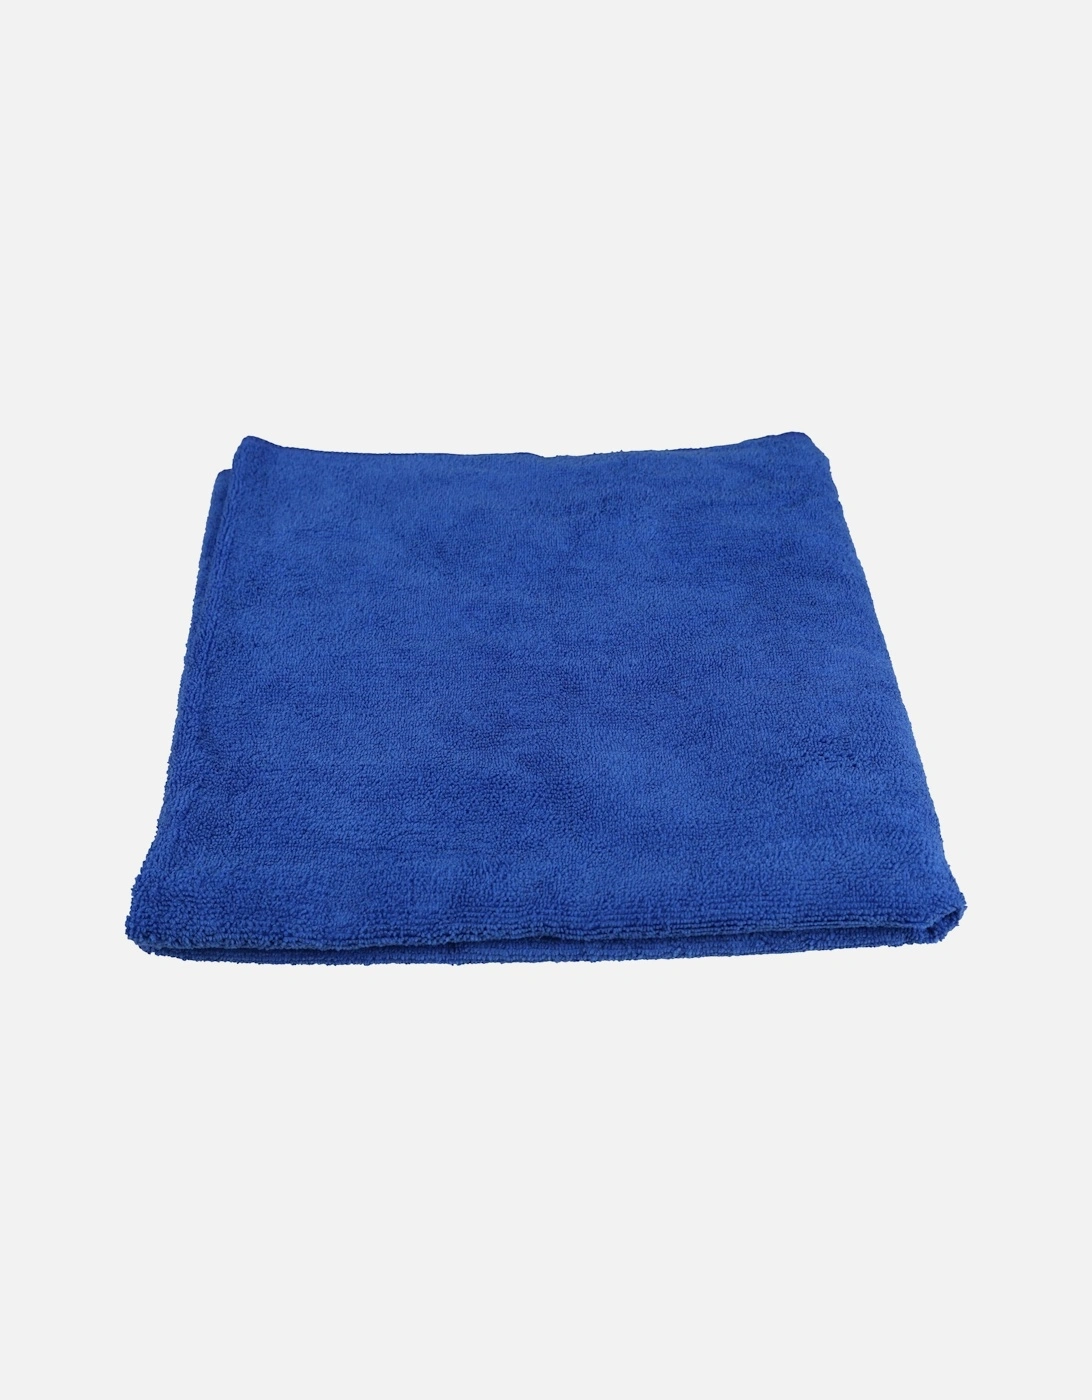 Great Outdoors Lightweight Large Compact Travel Towel